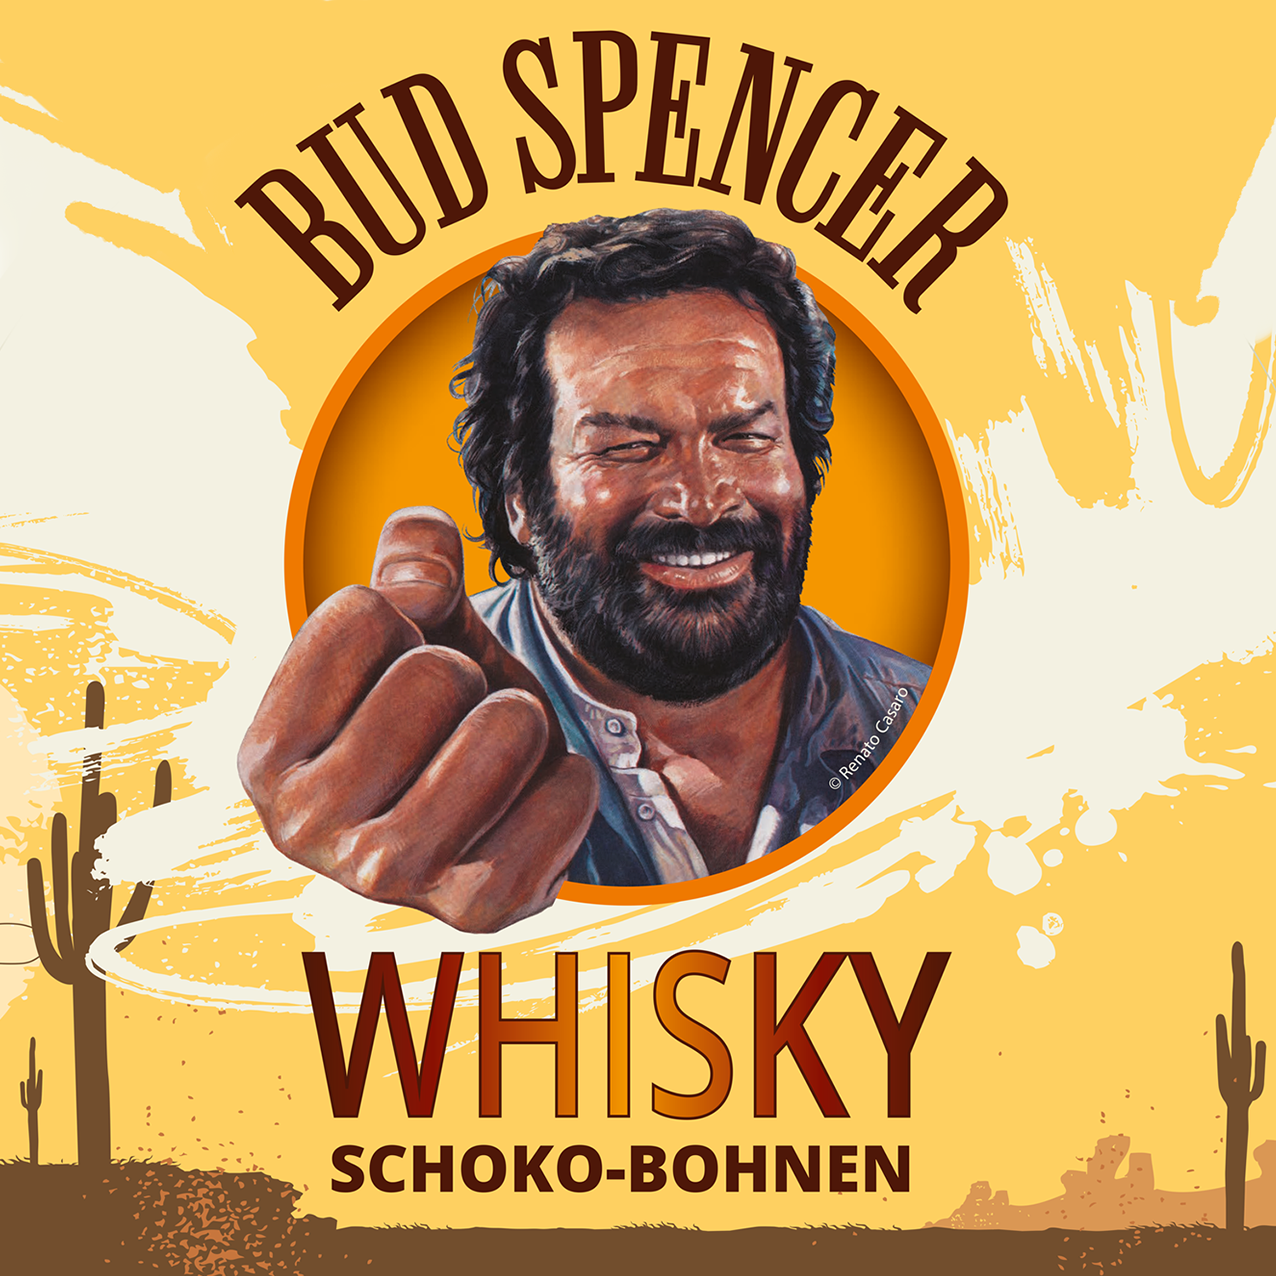 BSL brings the Bud Spencer brand together with Piasten Chocolate